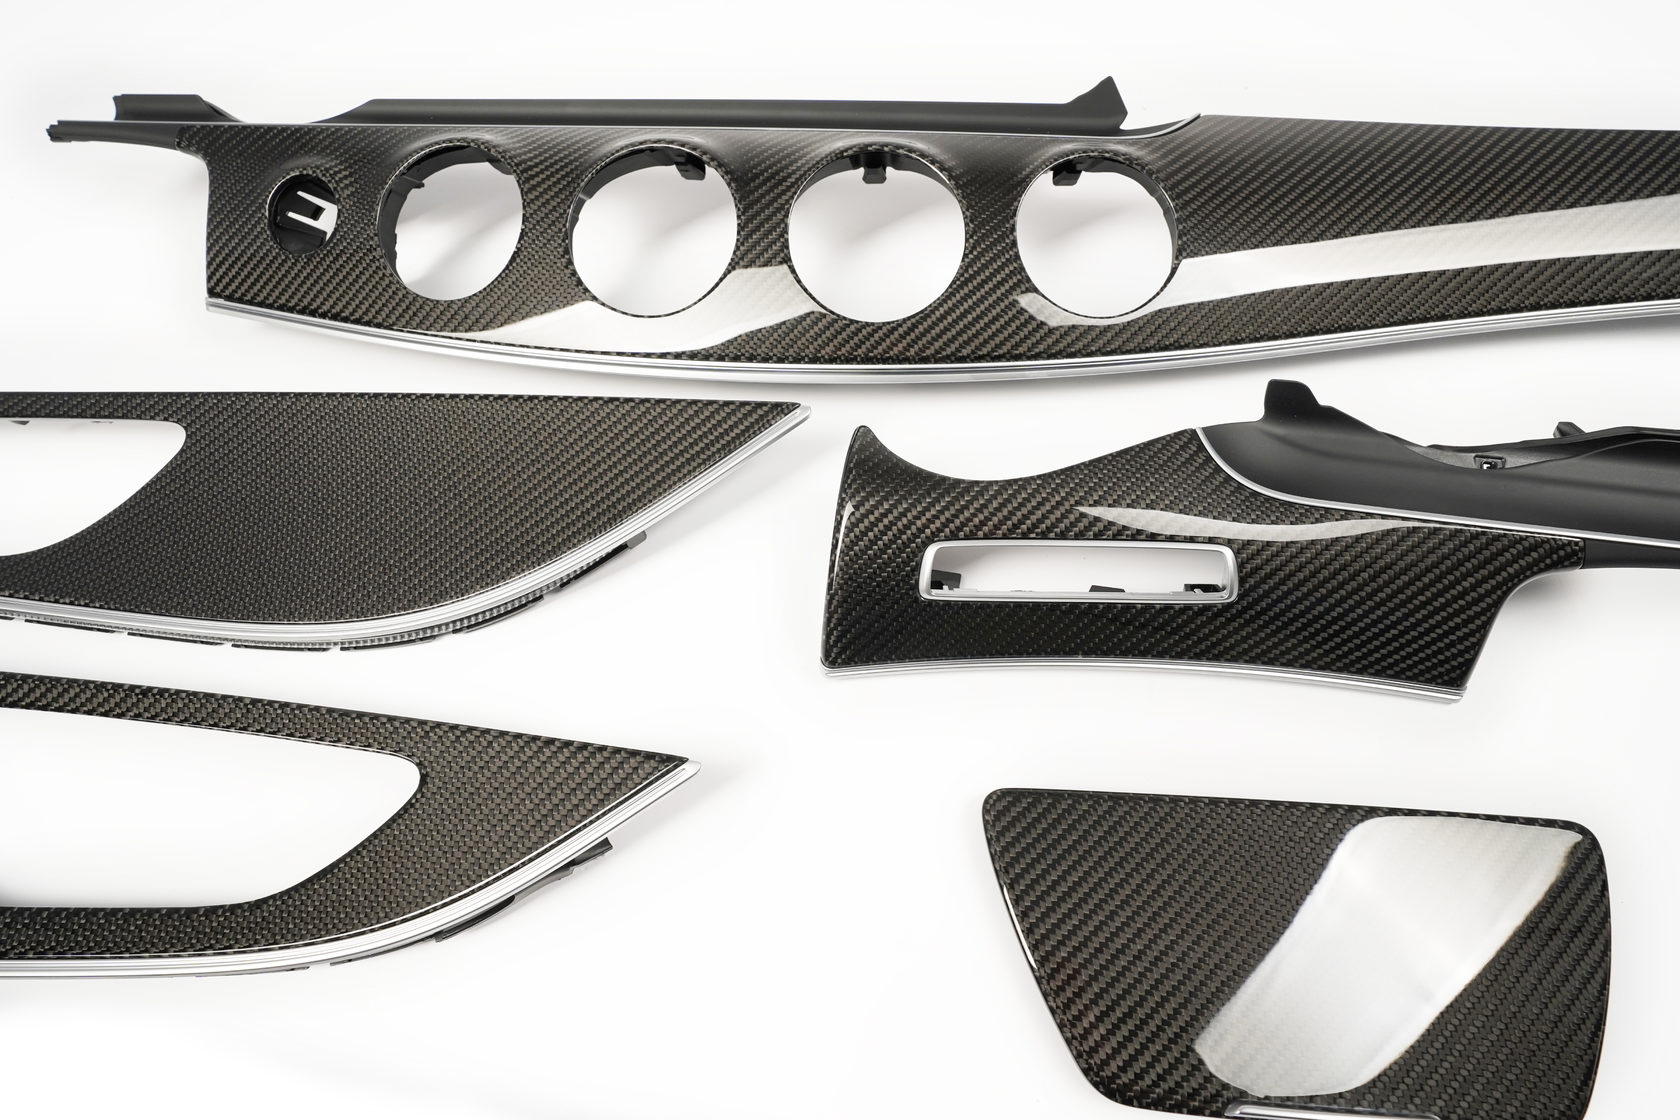 Check price and buy Carbon Fiber Body kit set for Mercedes E-class AMG W213 E63 AMG Restyling